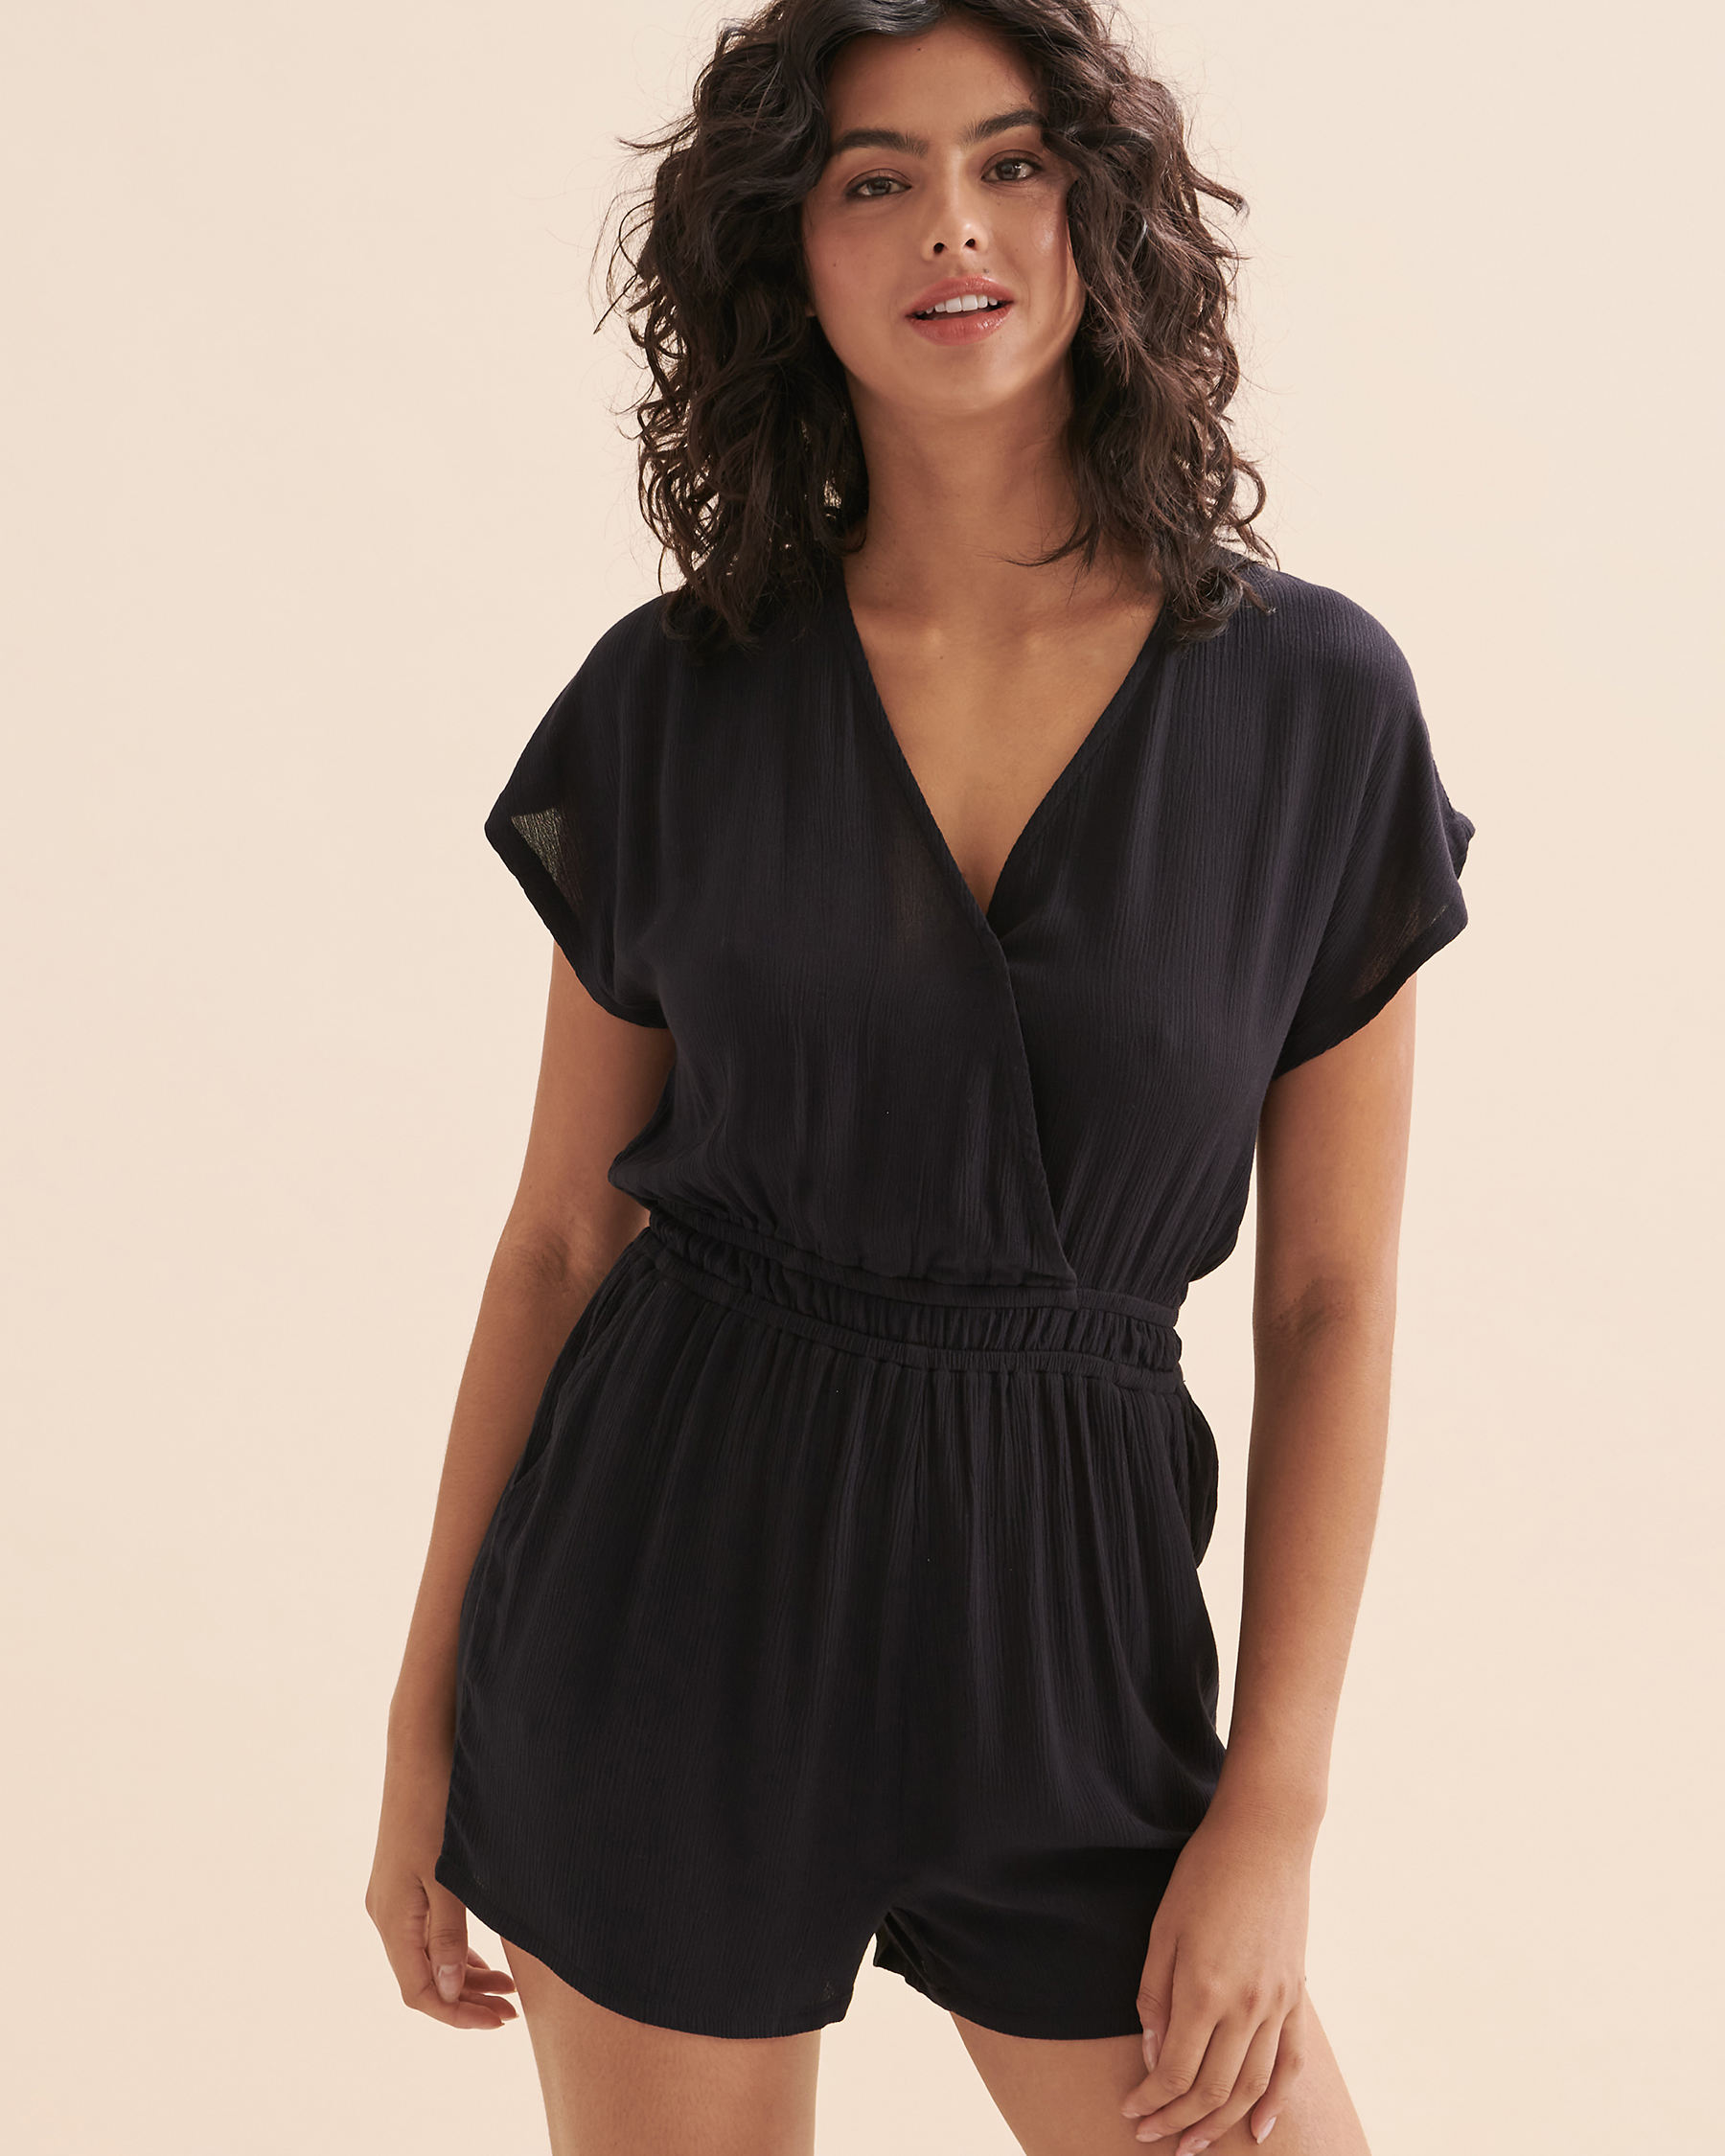 Women's jumpsuits & rompers from popular brands